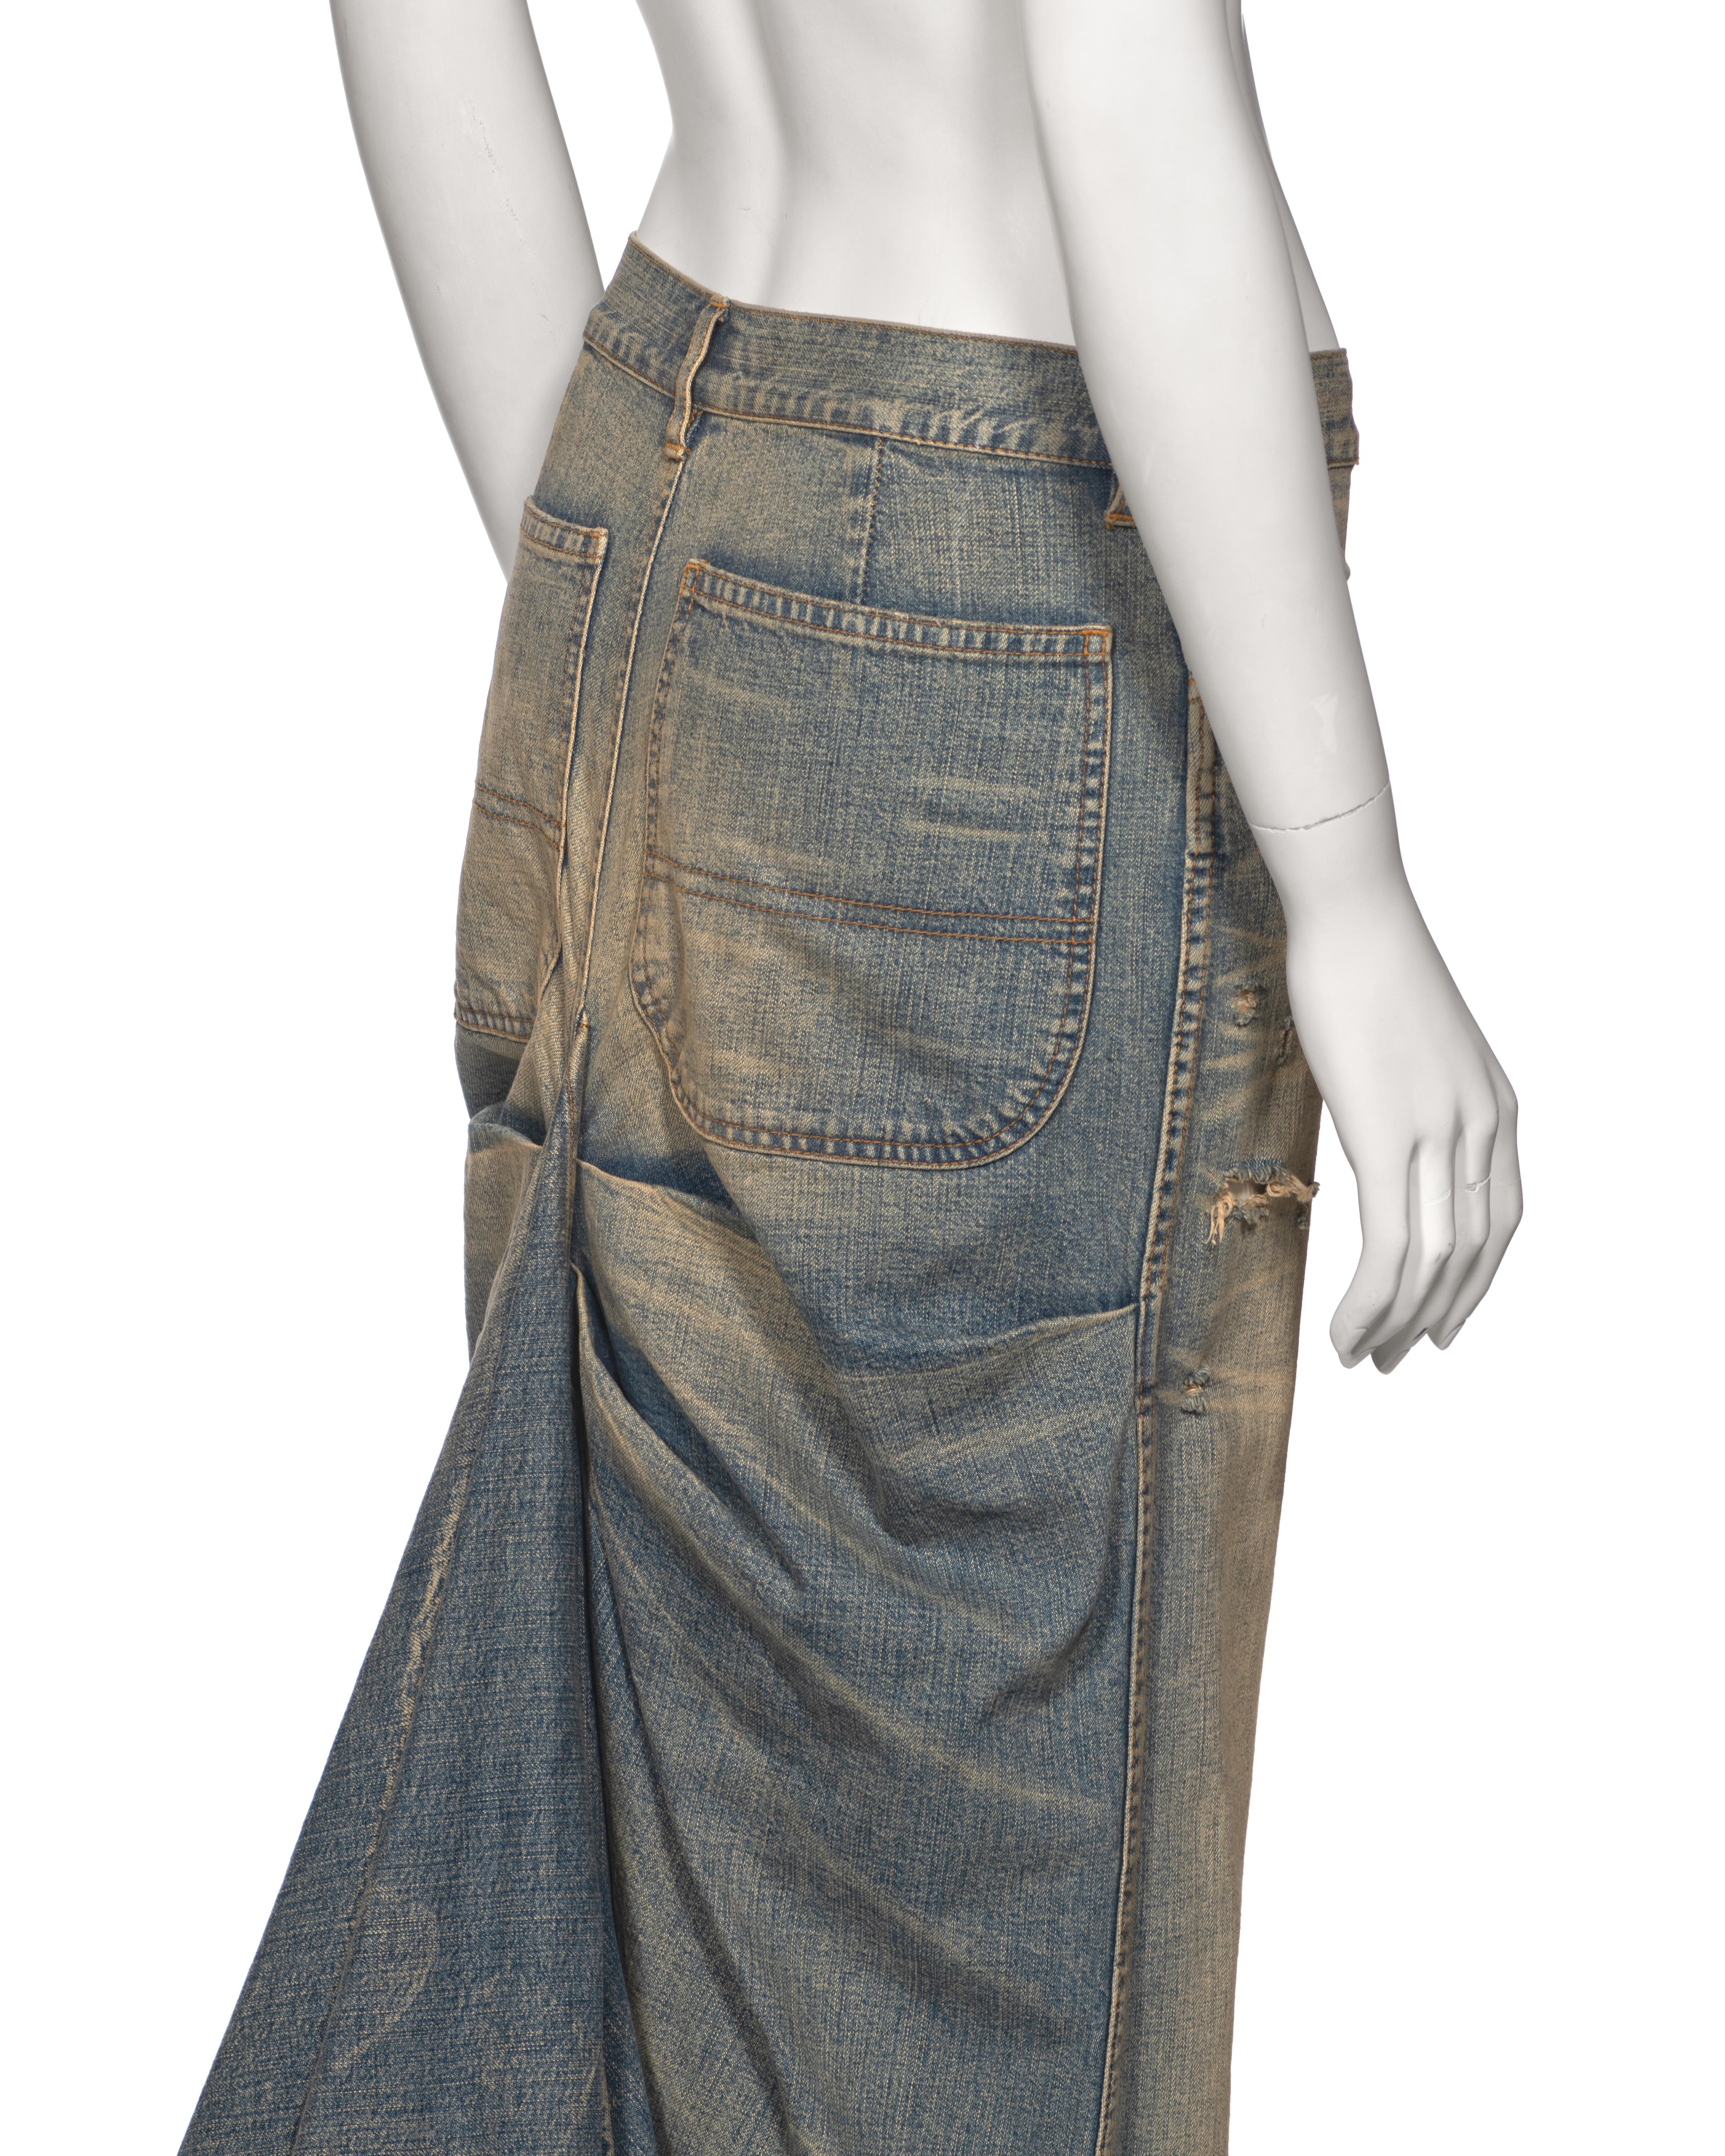 Ralph Lauren Distressed Sand Washed Denim Maxi Skirt with Train, ss 2003 For Sale 4